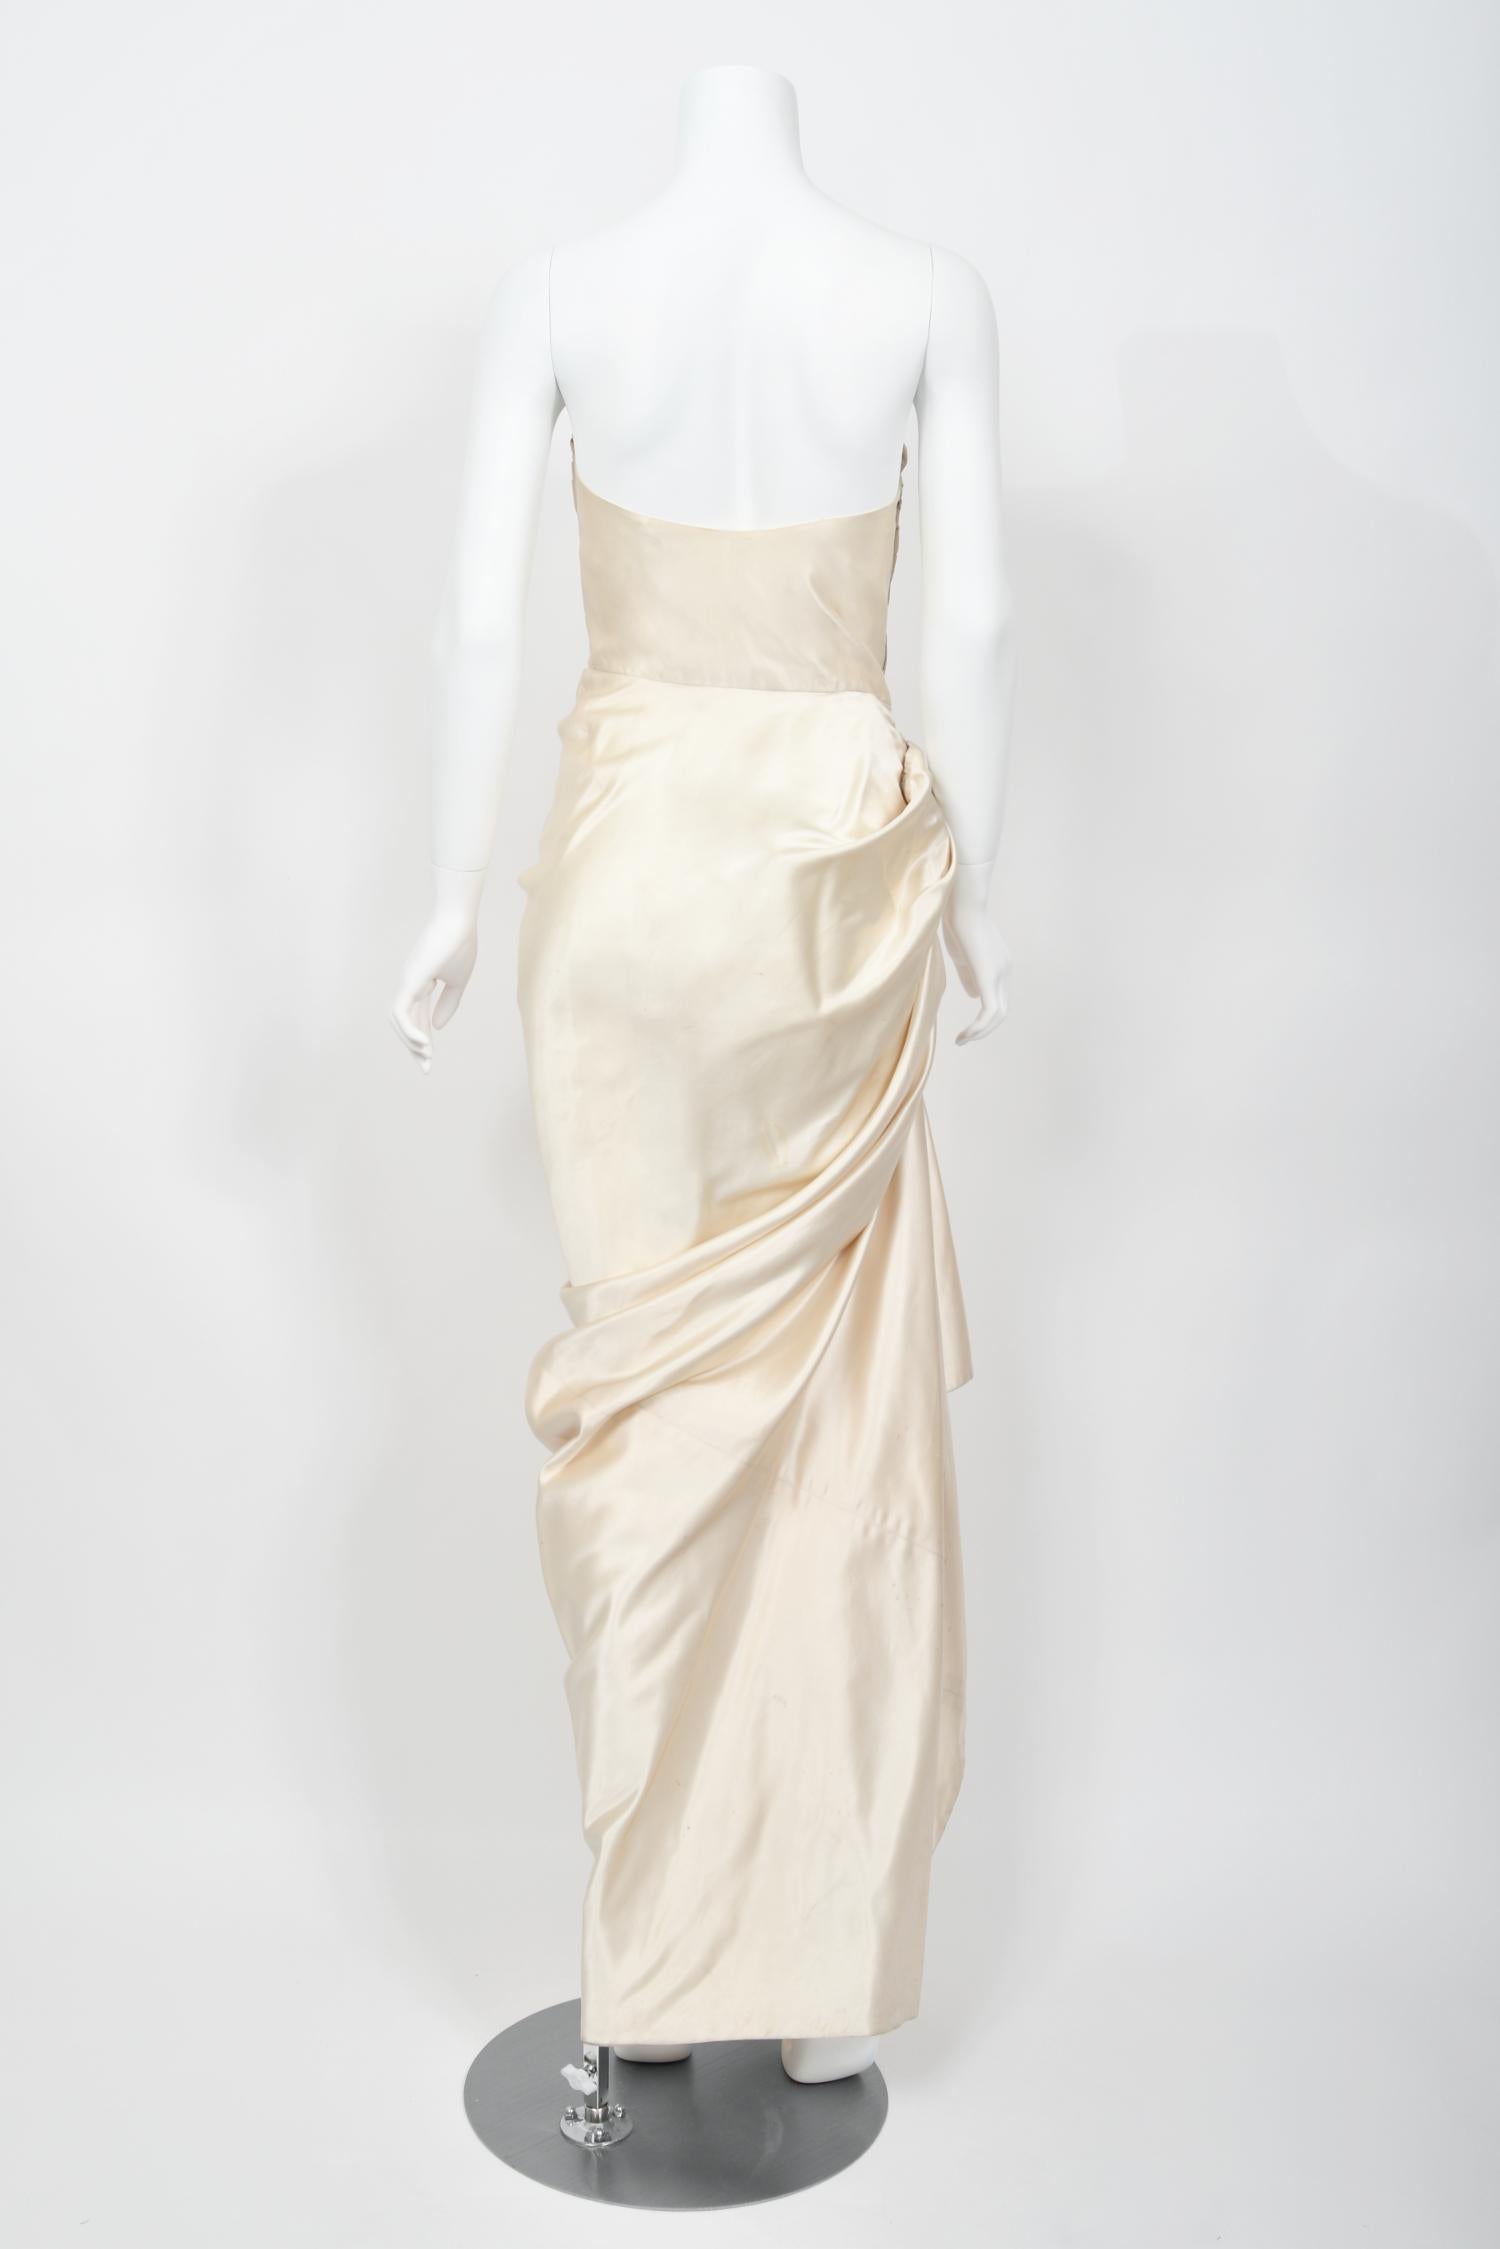 1949 Jeanne Lanvin Haute Couture Ivory Silk Satin Strapless Draped Bridal Gown  For Sale 10